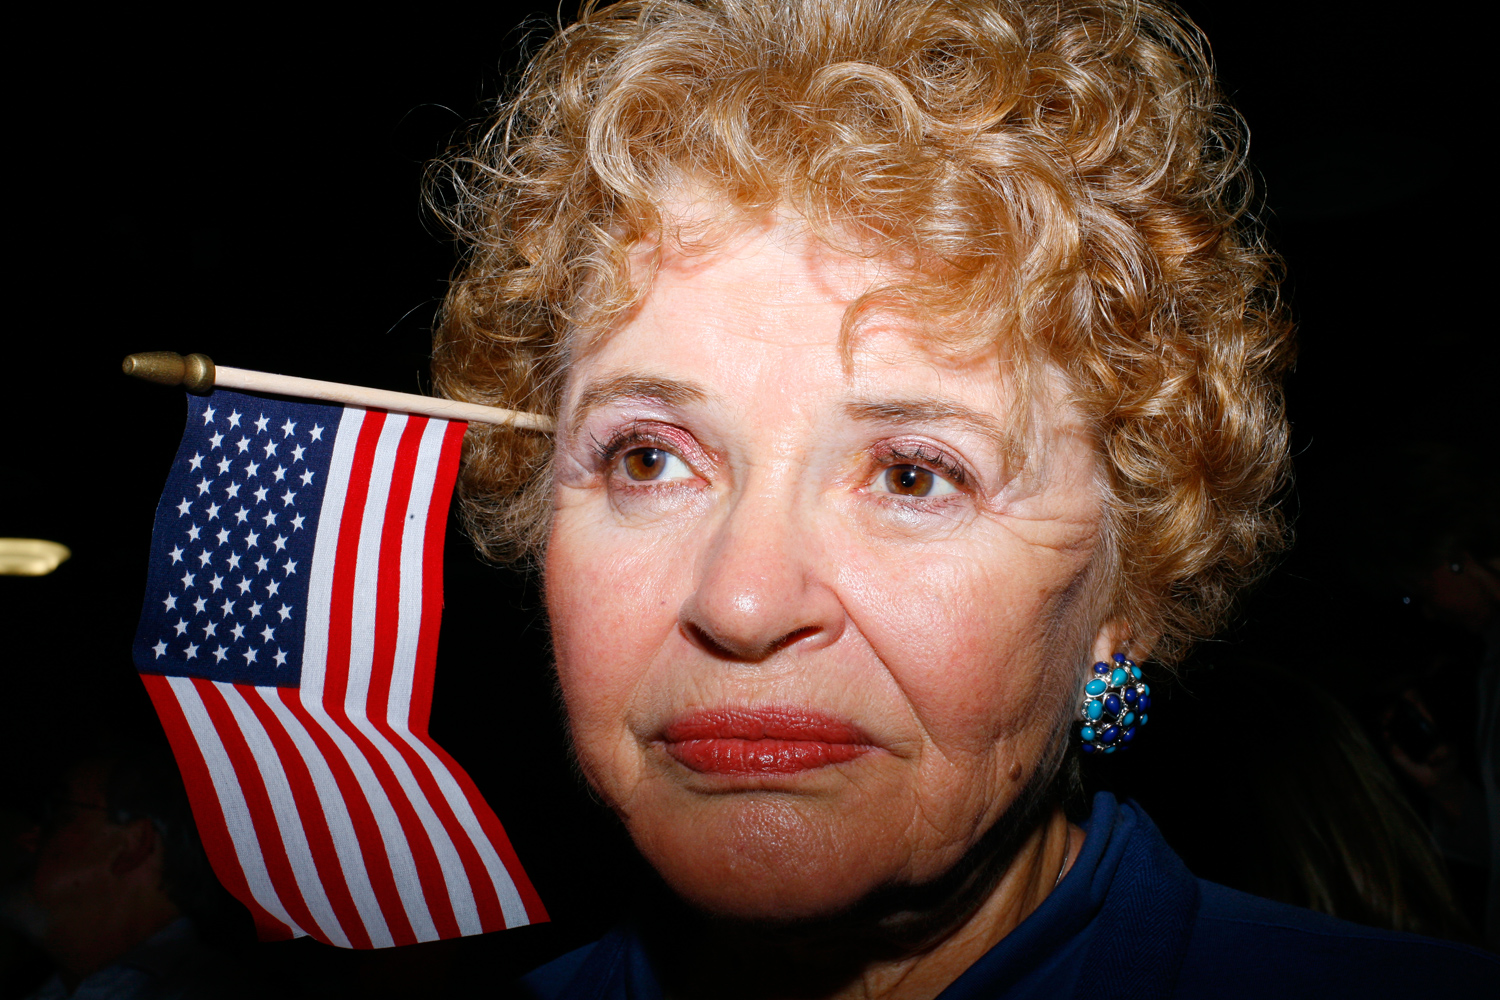 Attendee at a Gingrich rally at the Republican Jewish Coalition, Delray Beach, Fla., January 27, 2012.